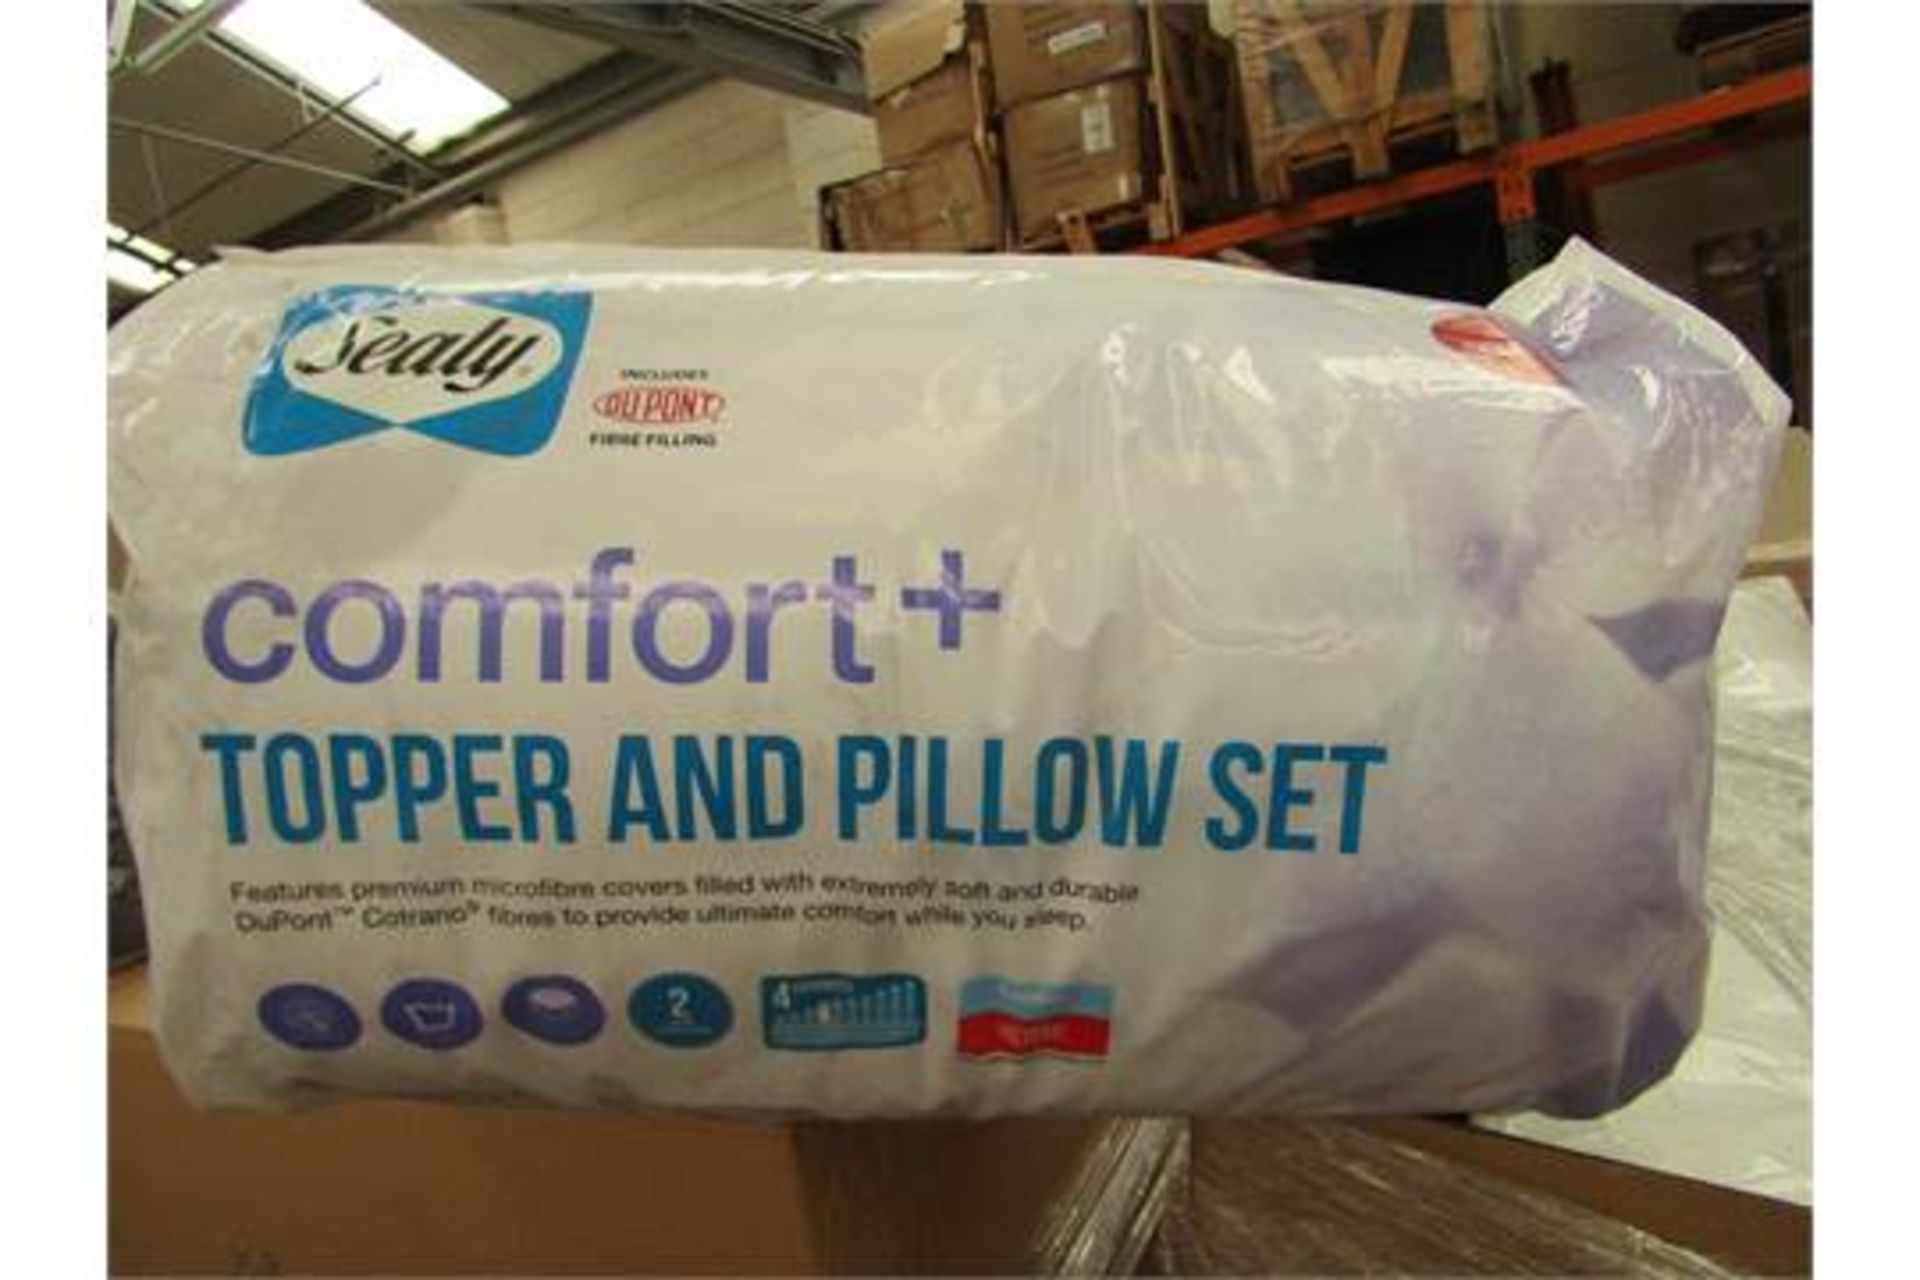 1x Sealy 'Comfort+' topper and pillow set, double size, new in packaging.